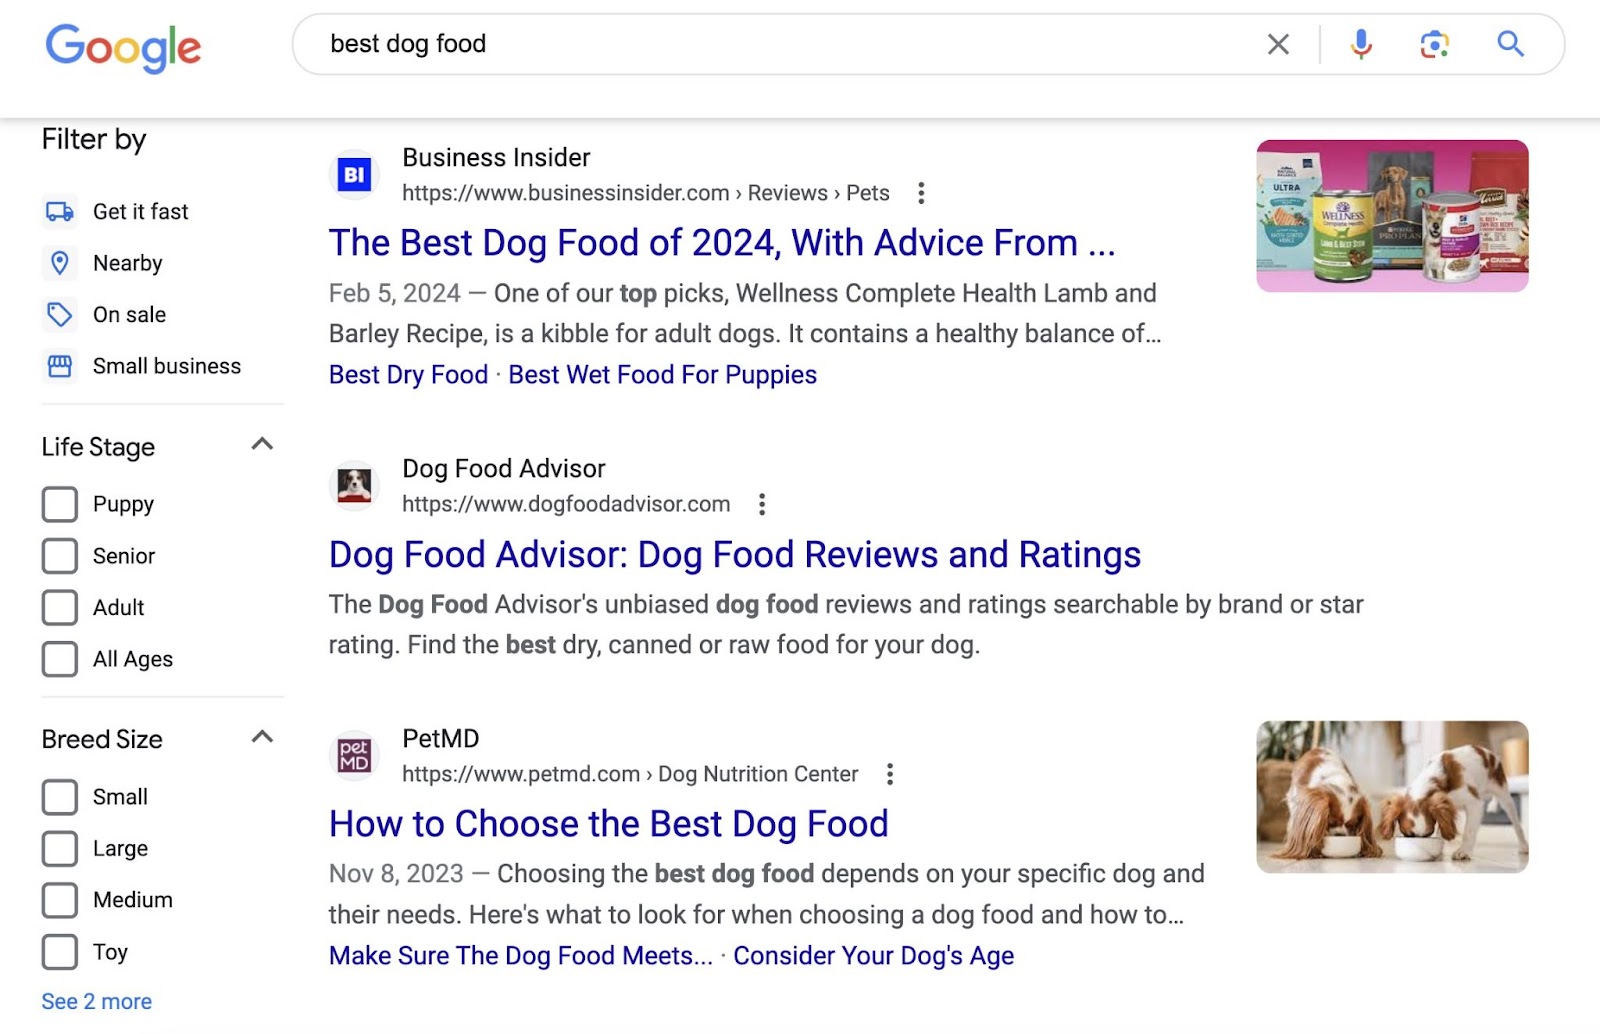 Top conception  of Google's SERP for the “best canine  food” query